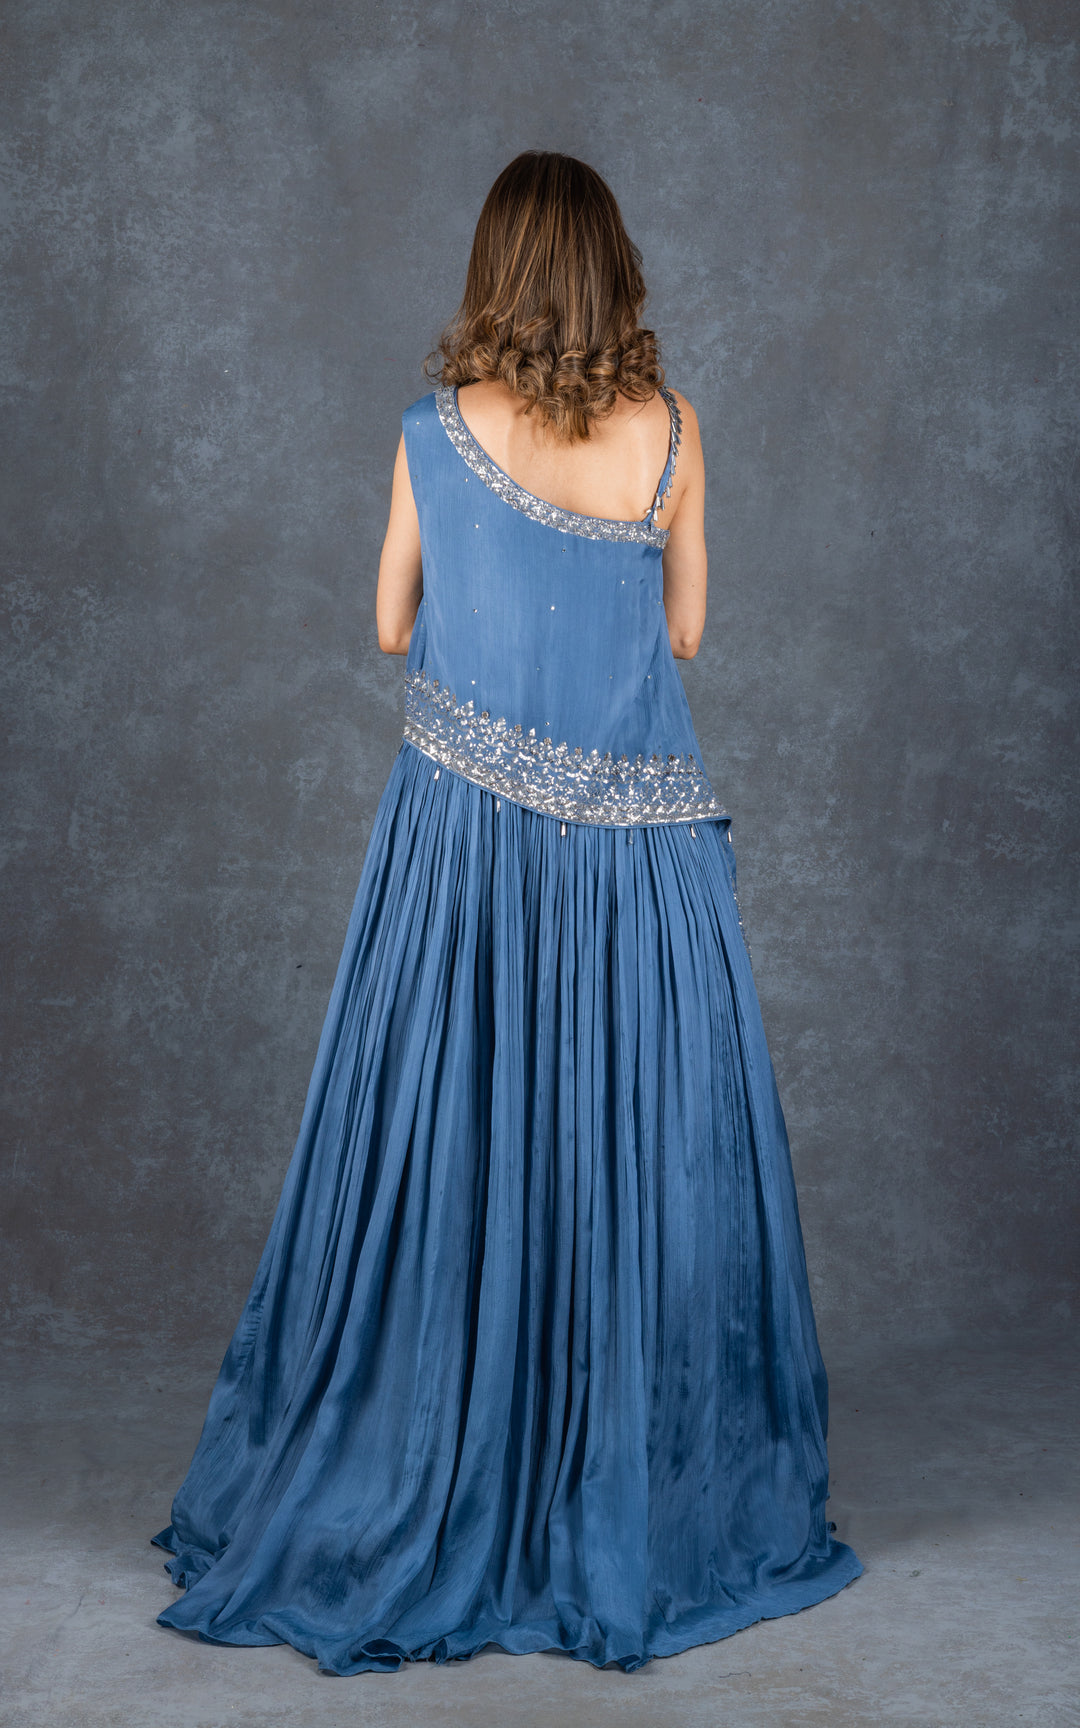 Blue Stylish Gown